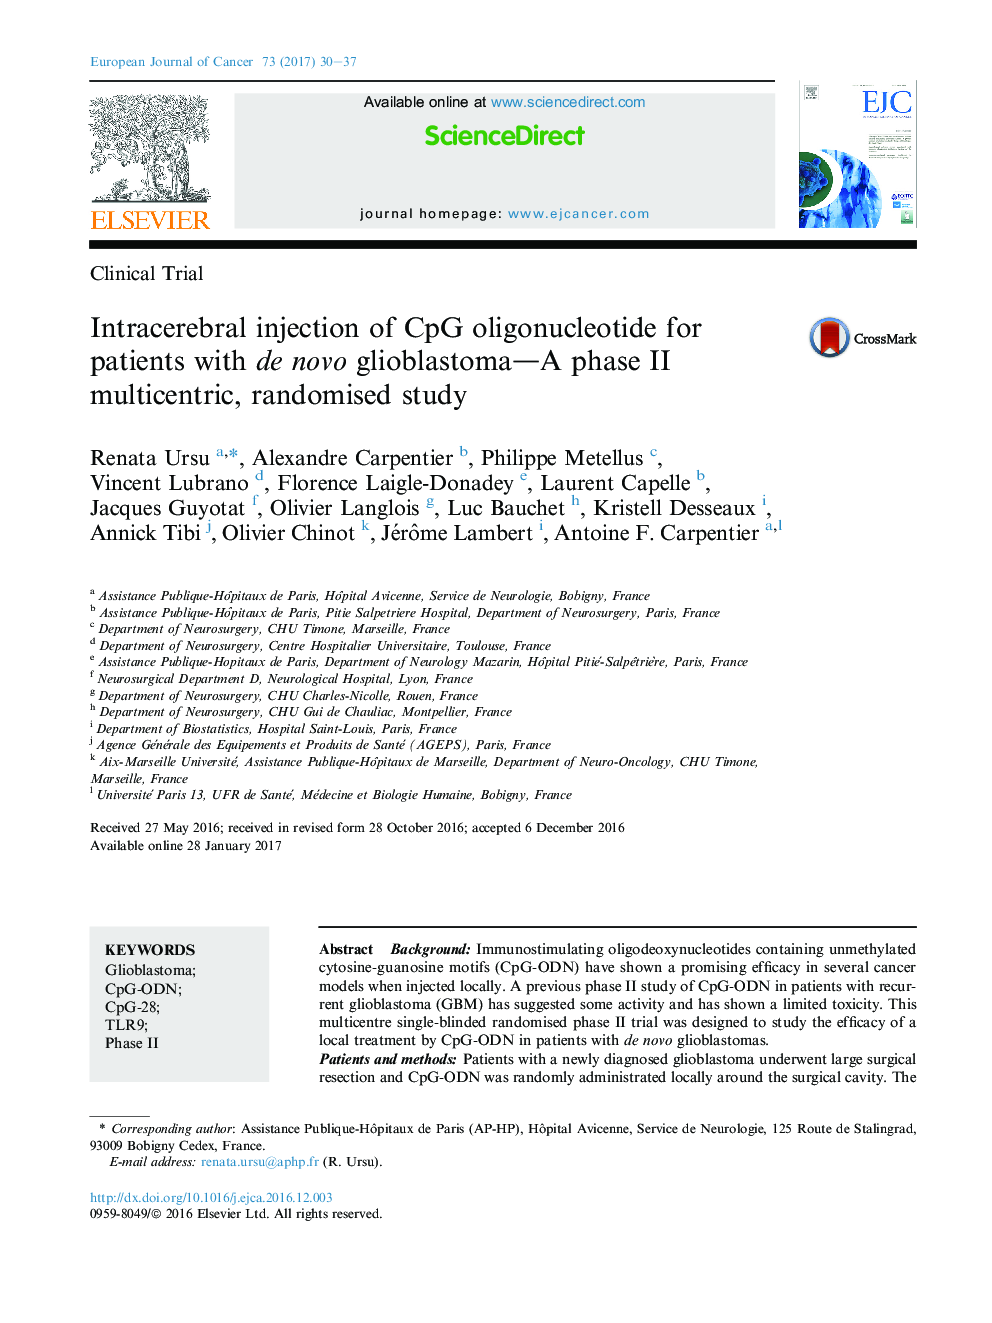 Clinical TrialIntracerebral injection of CpG oligonucleotide for patients with de novo glioblastoma-A phase II multicentric, randomised study